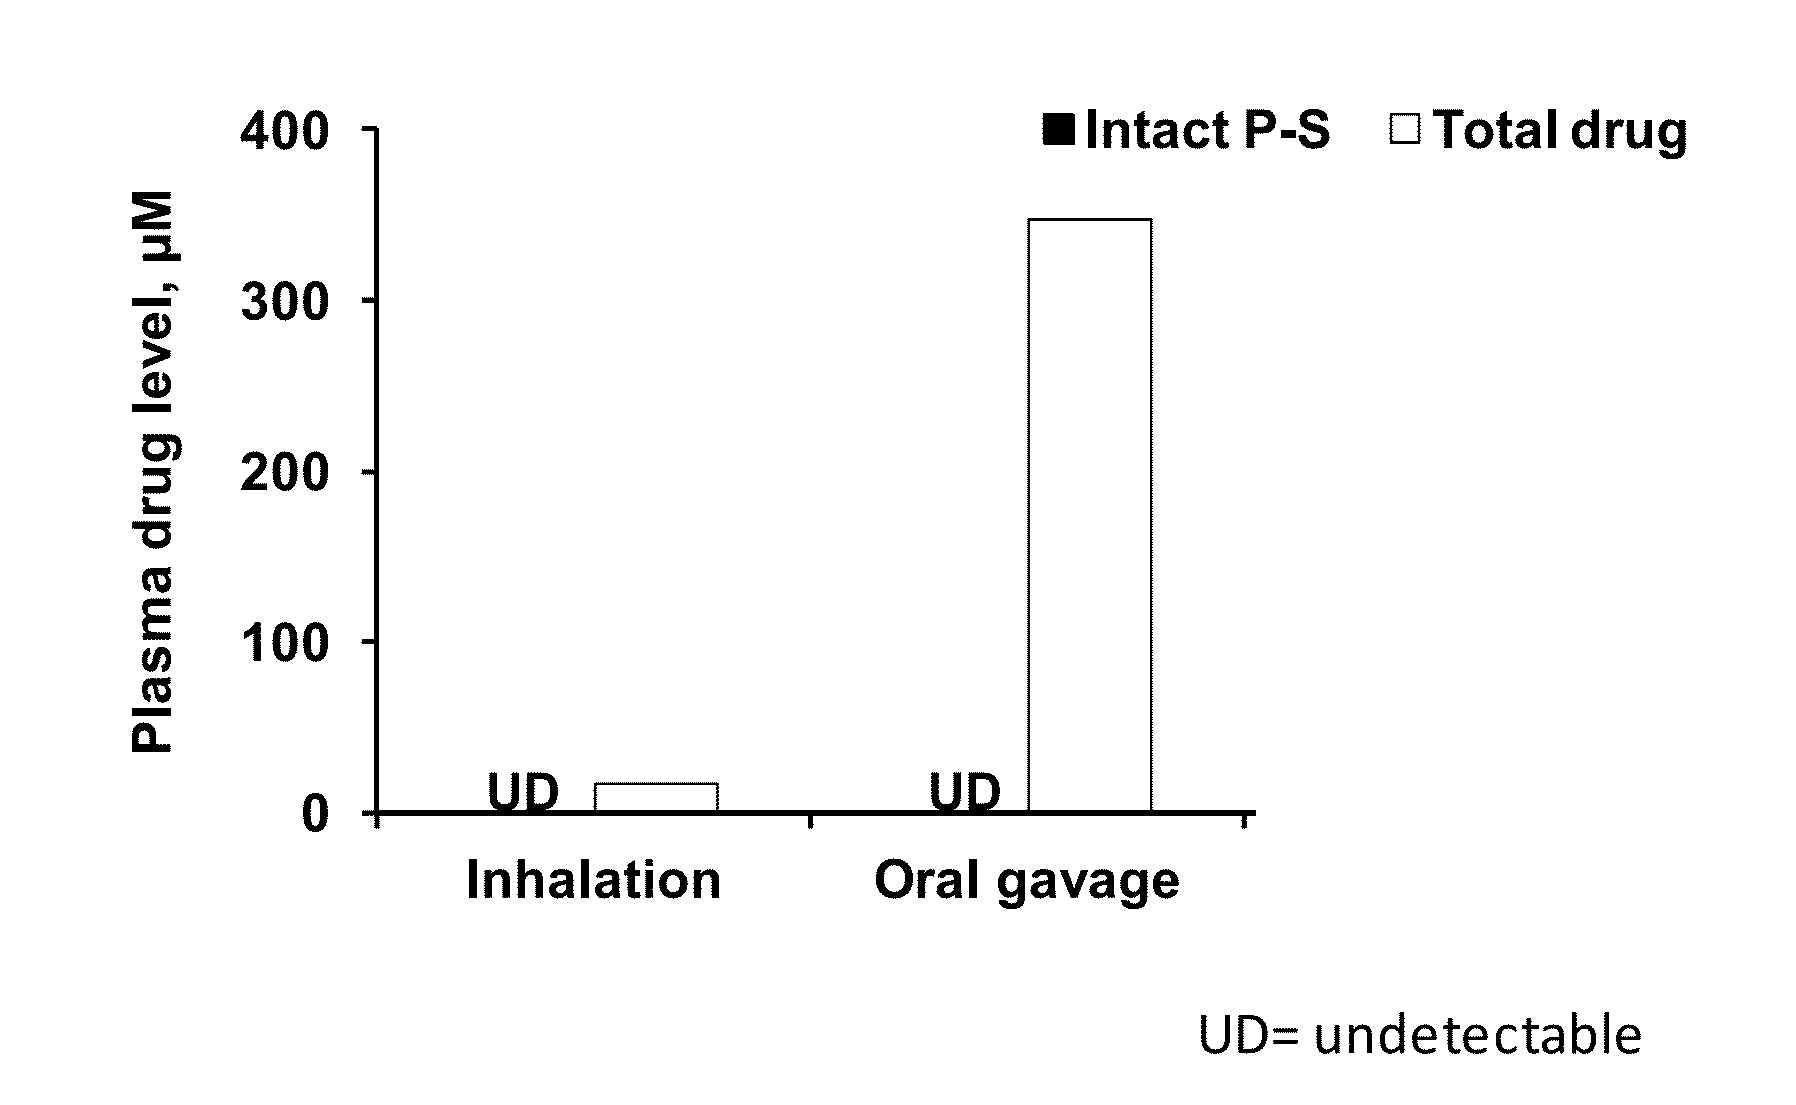 Product comprising a nicotine-containing material and an Anti-cancer agent